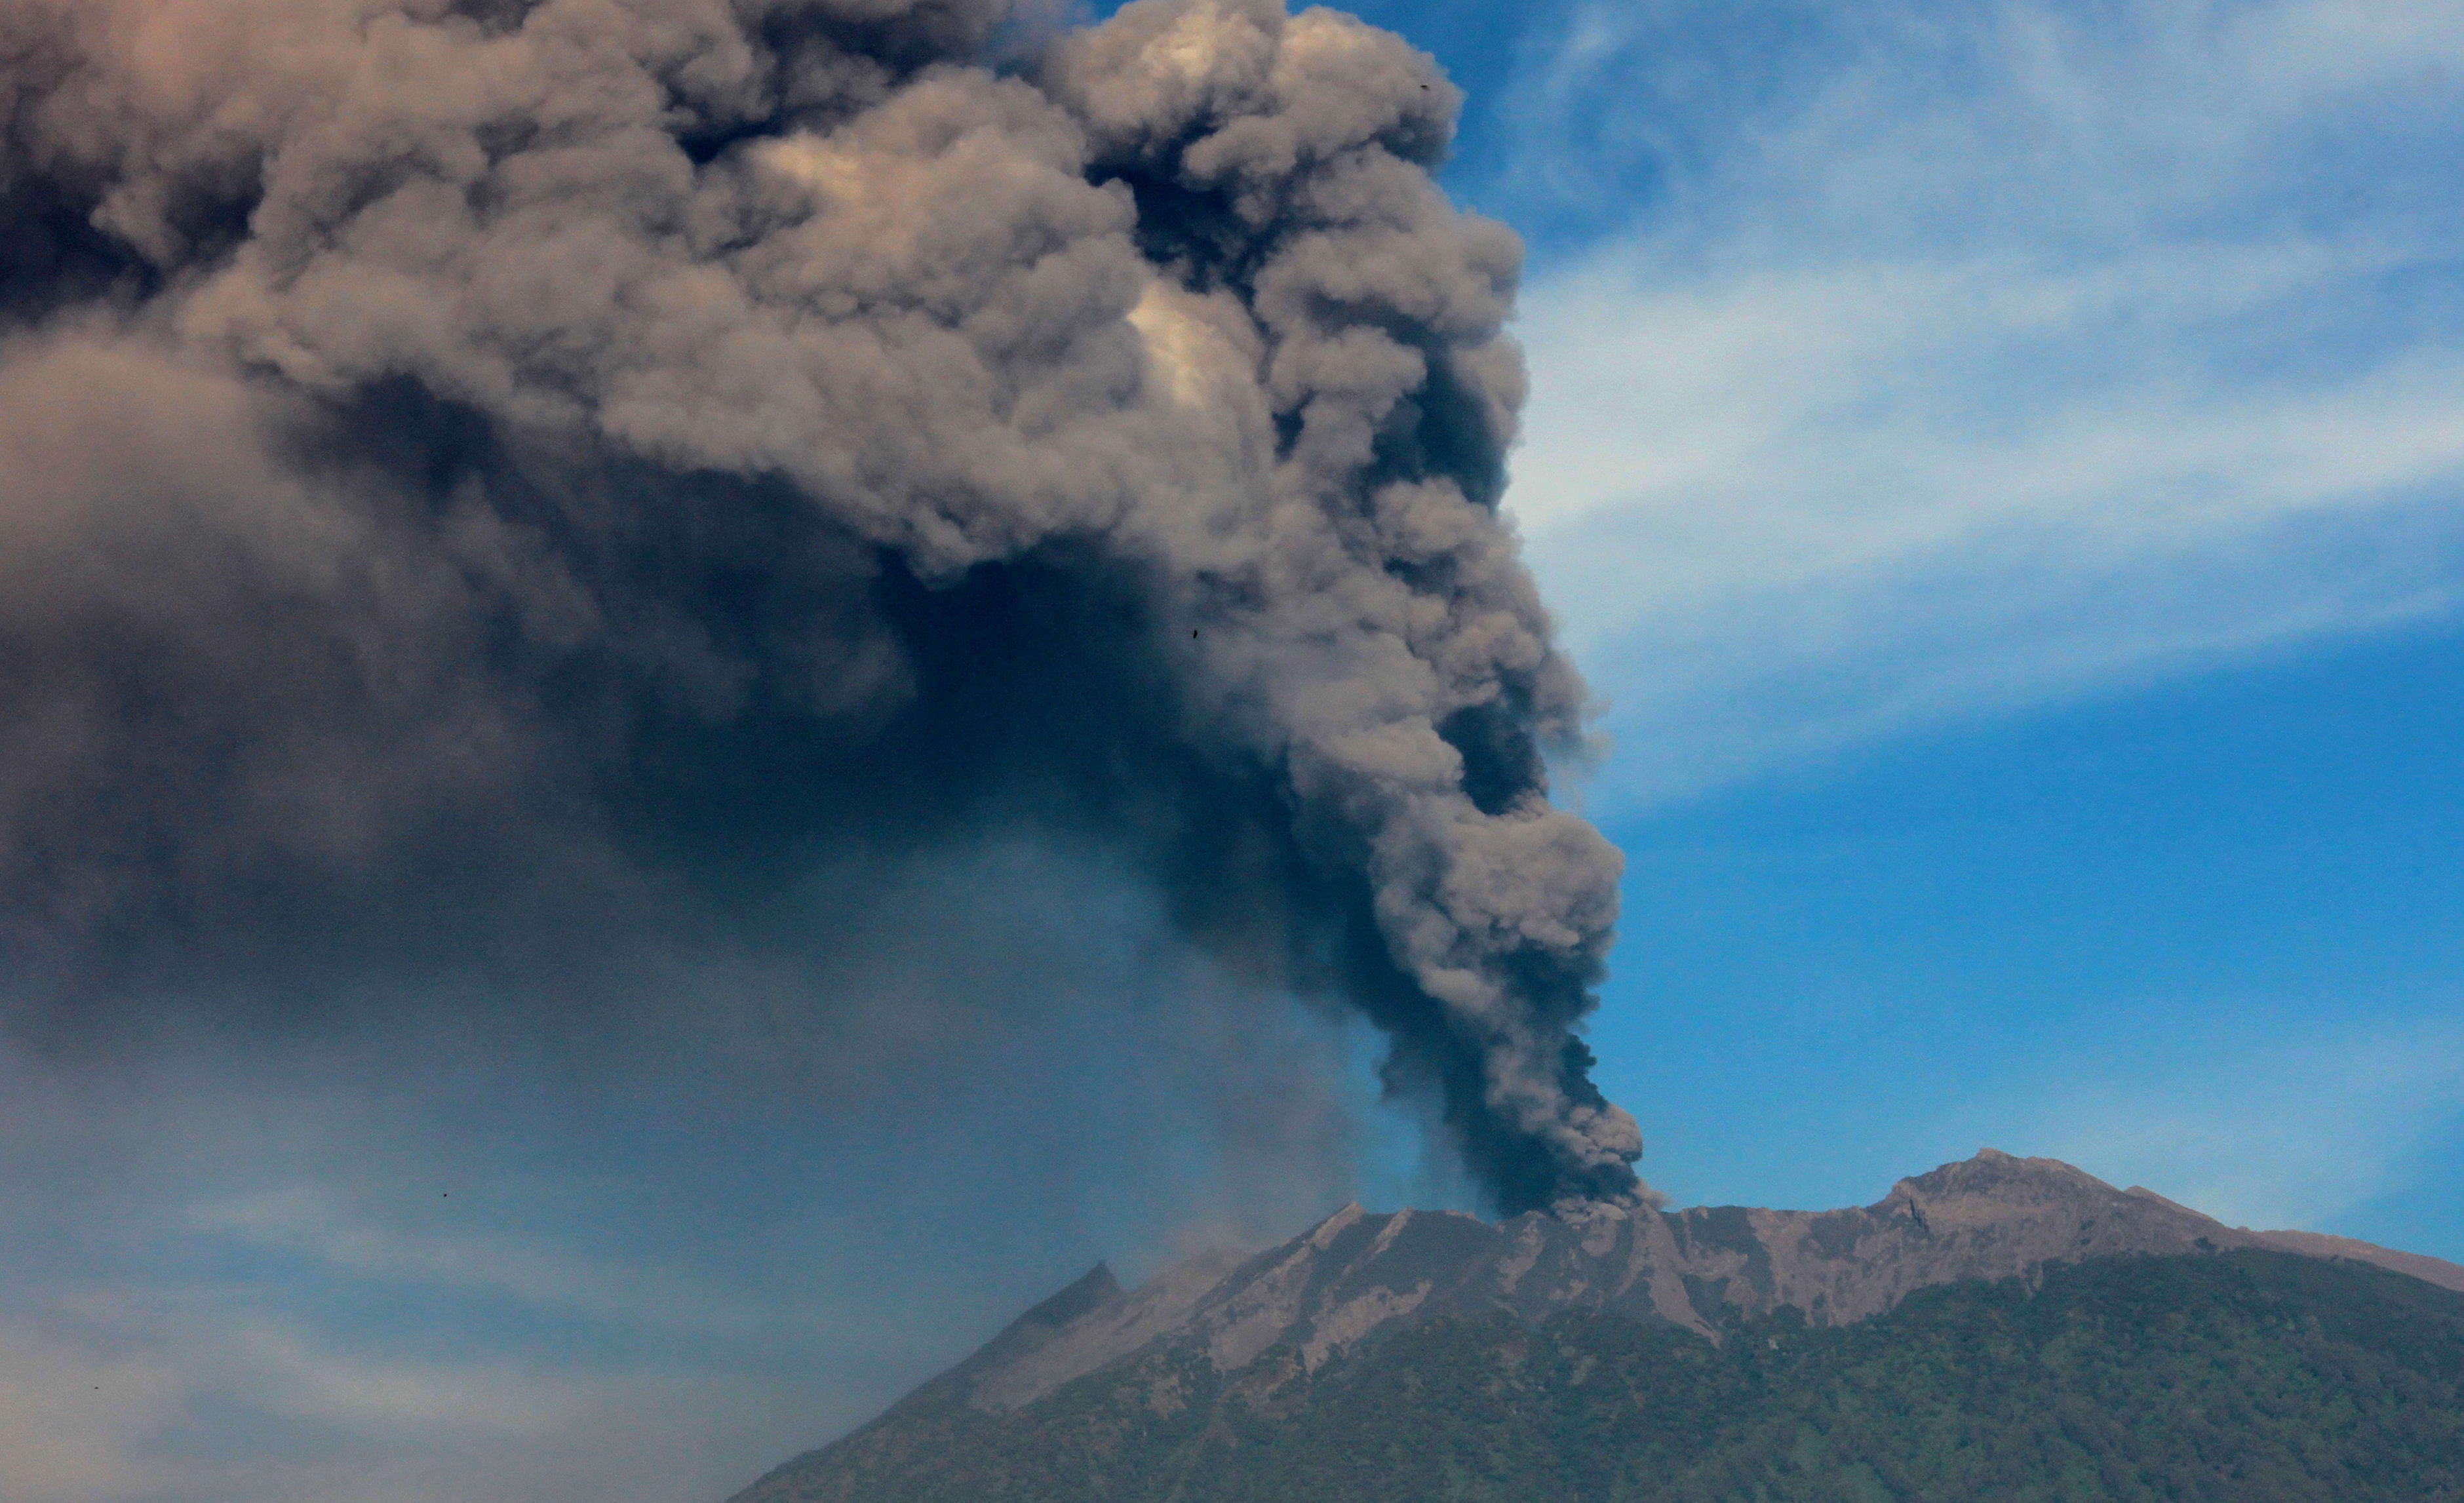 Mount Raung emits a column of ash and steam on 12 July 2015.